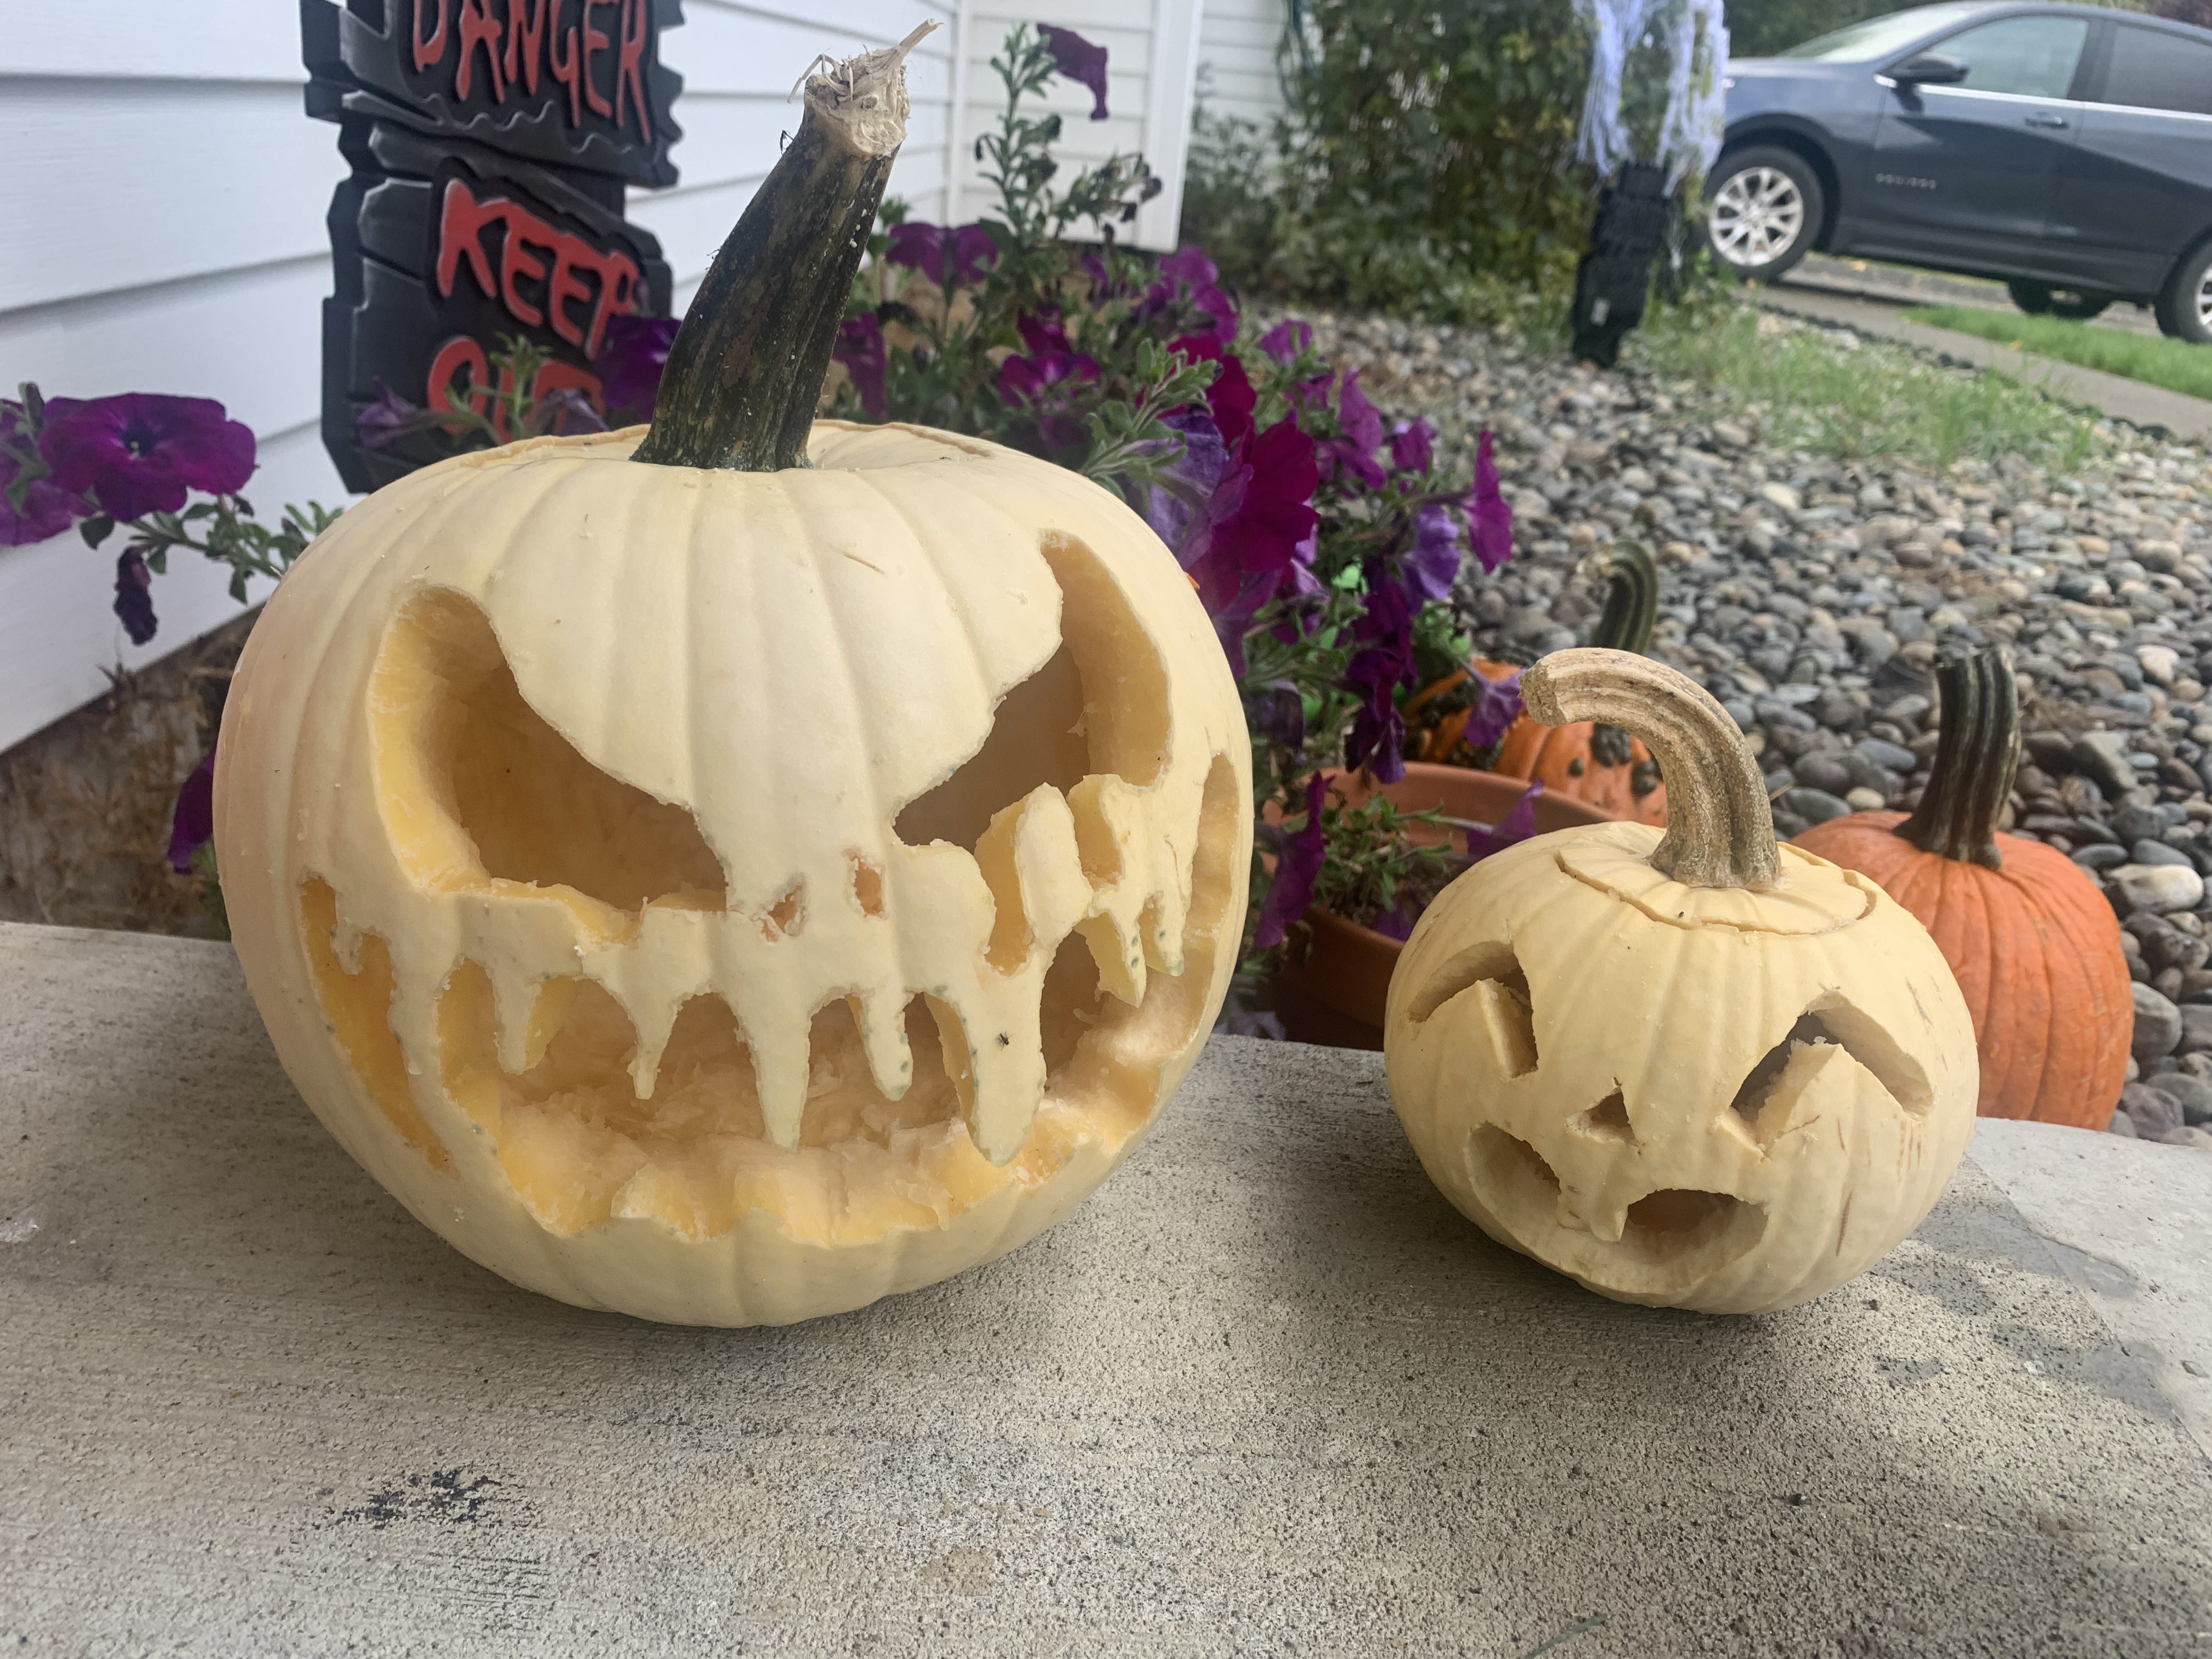 Two carved jack-o-lanterns. One has a scary face and one has a happy face. The scary one is larger than the cute one.